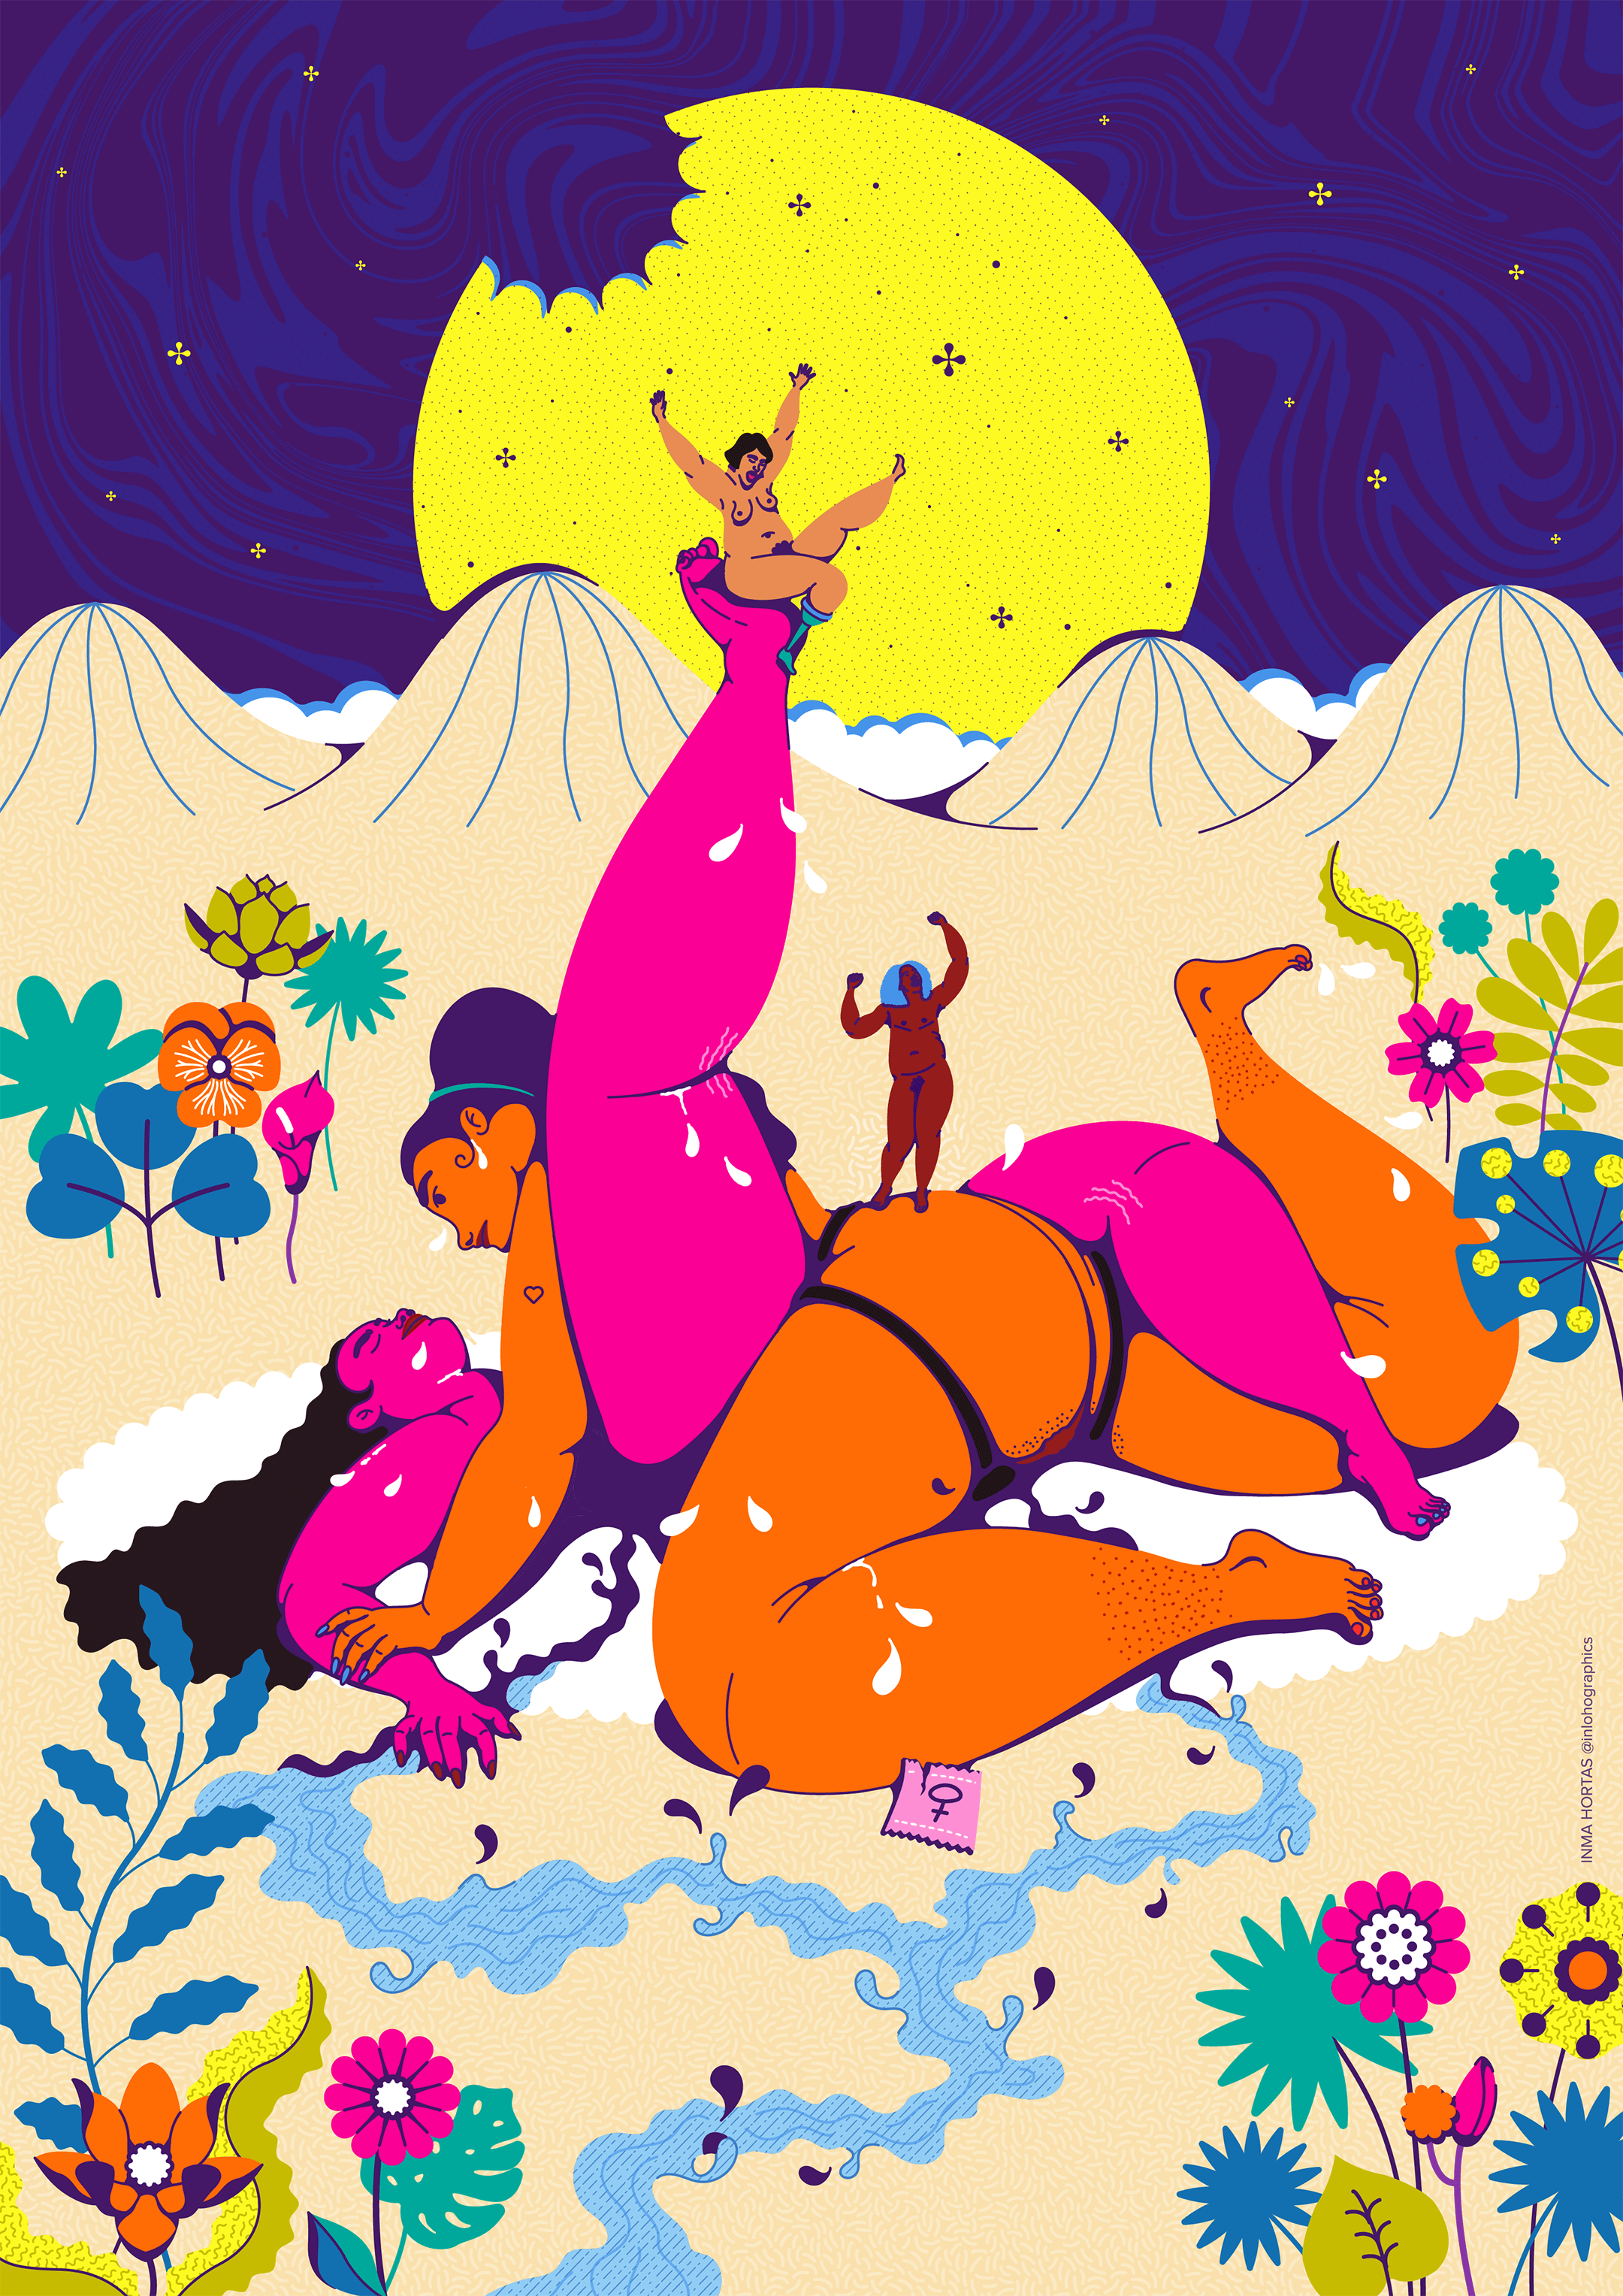 two females have sex with protection kamasutra pose pride lqtbiq+ lgbt illustrated by Inma Hortas inloho